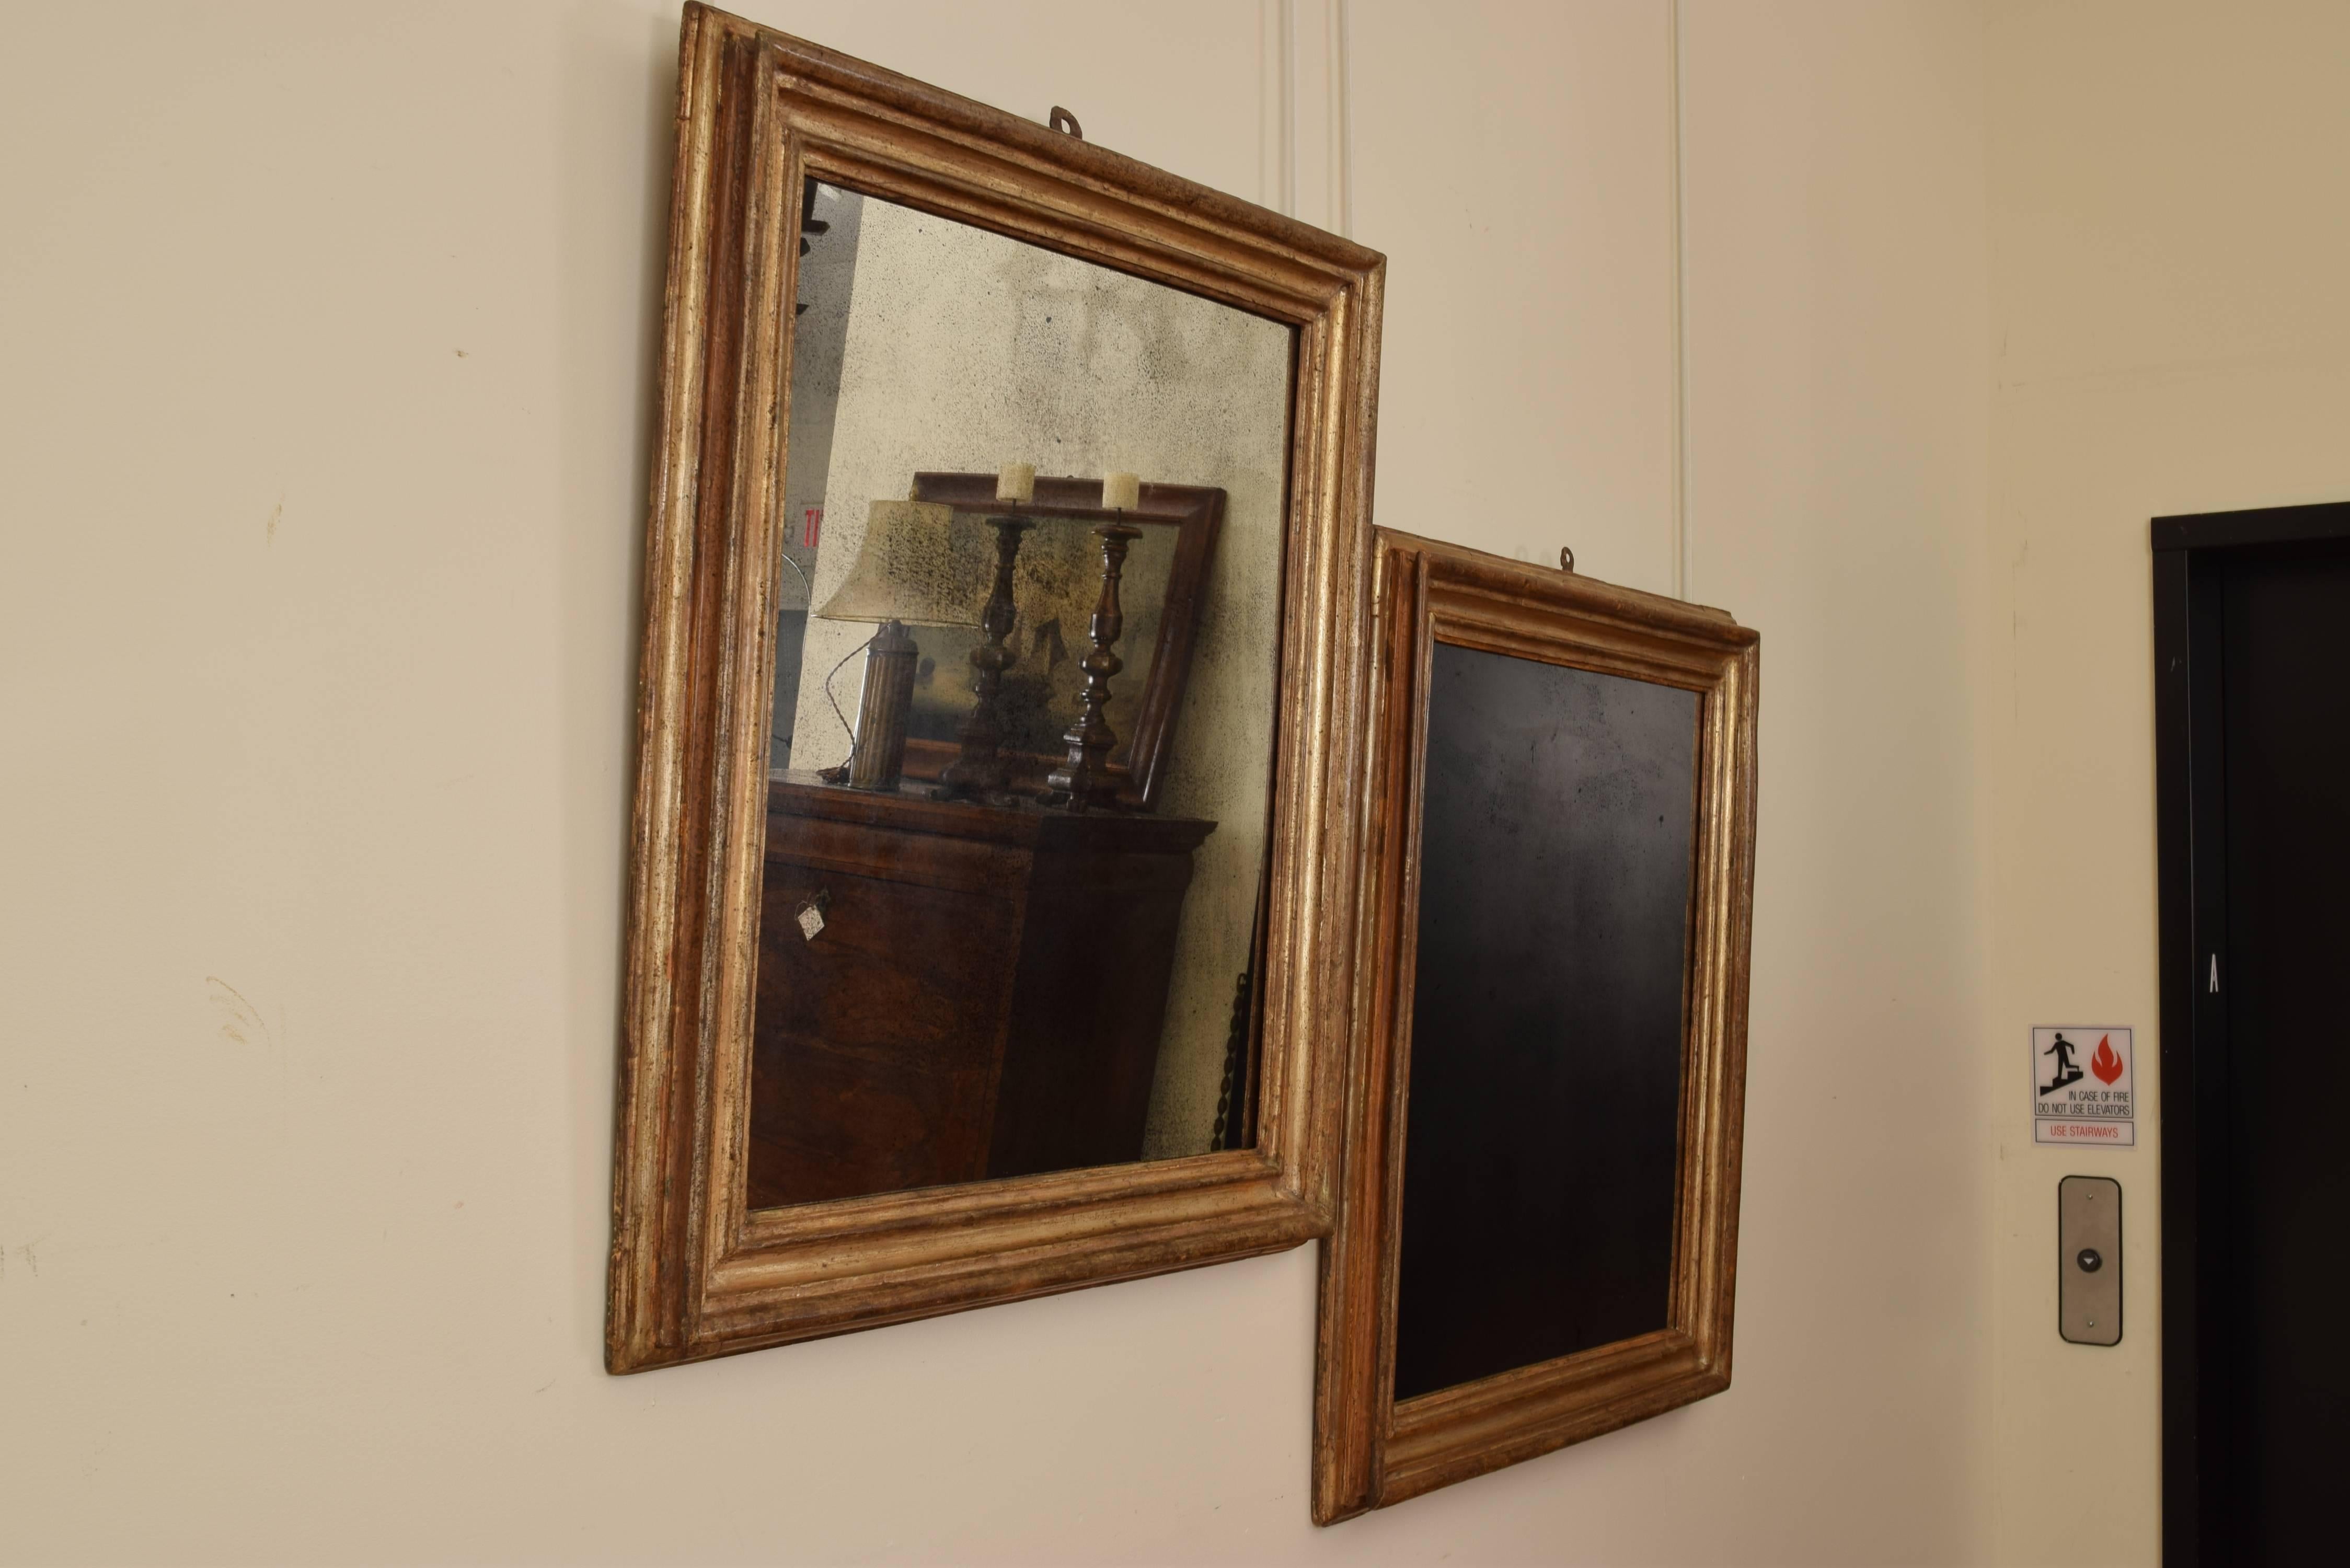 Pair of Italian late baroque silvered giltwood frames as mirrors the rectangular frames with multiple molded surfaces is covered in lacquered silver gilt also known in Italian as 